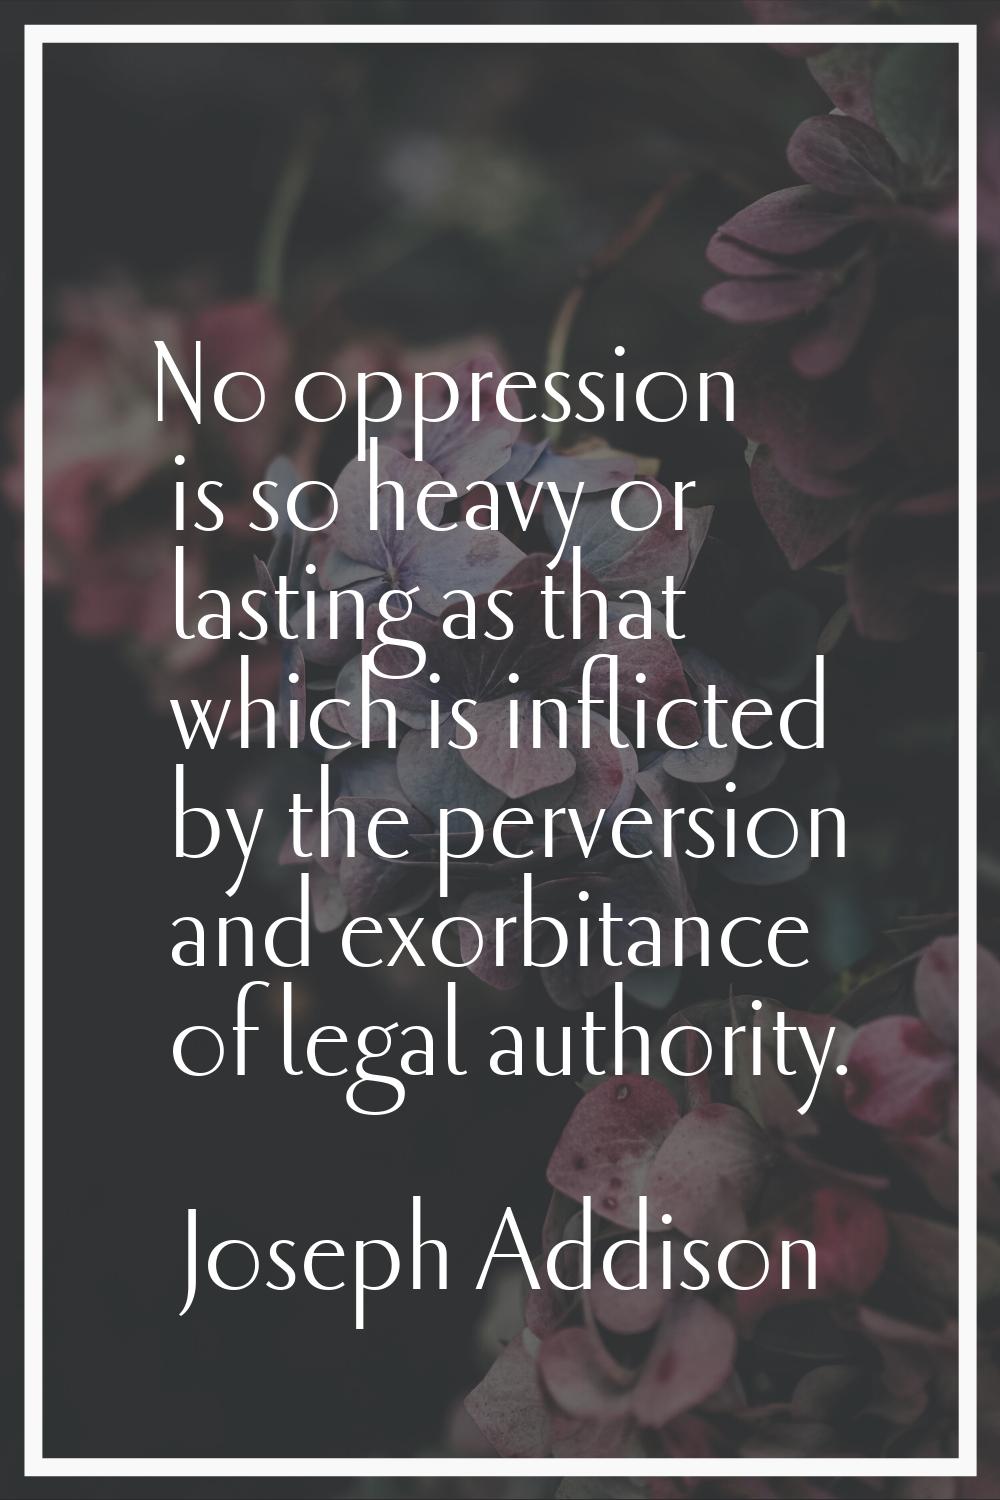 No oppression is so heavy or lasting as that which is inflicted by the perversion and exorbitance o